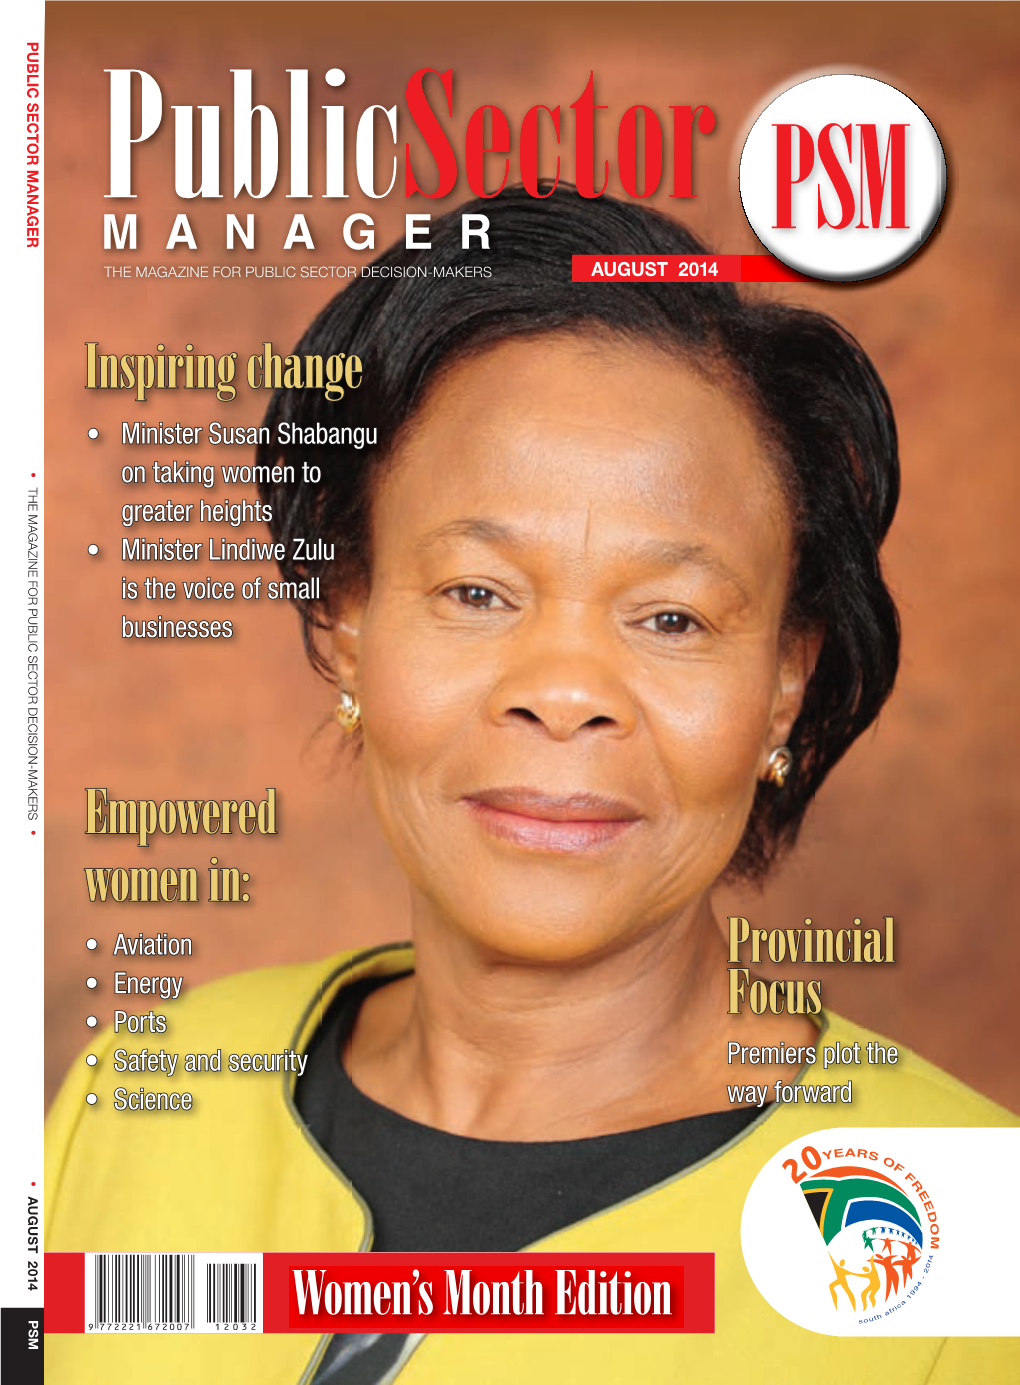 PSM August 2014.Indd